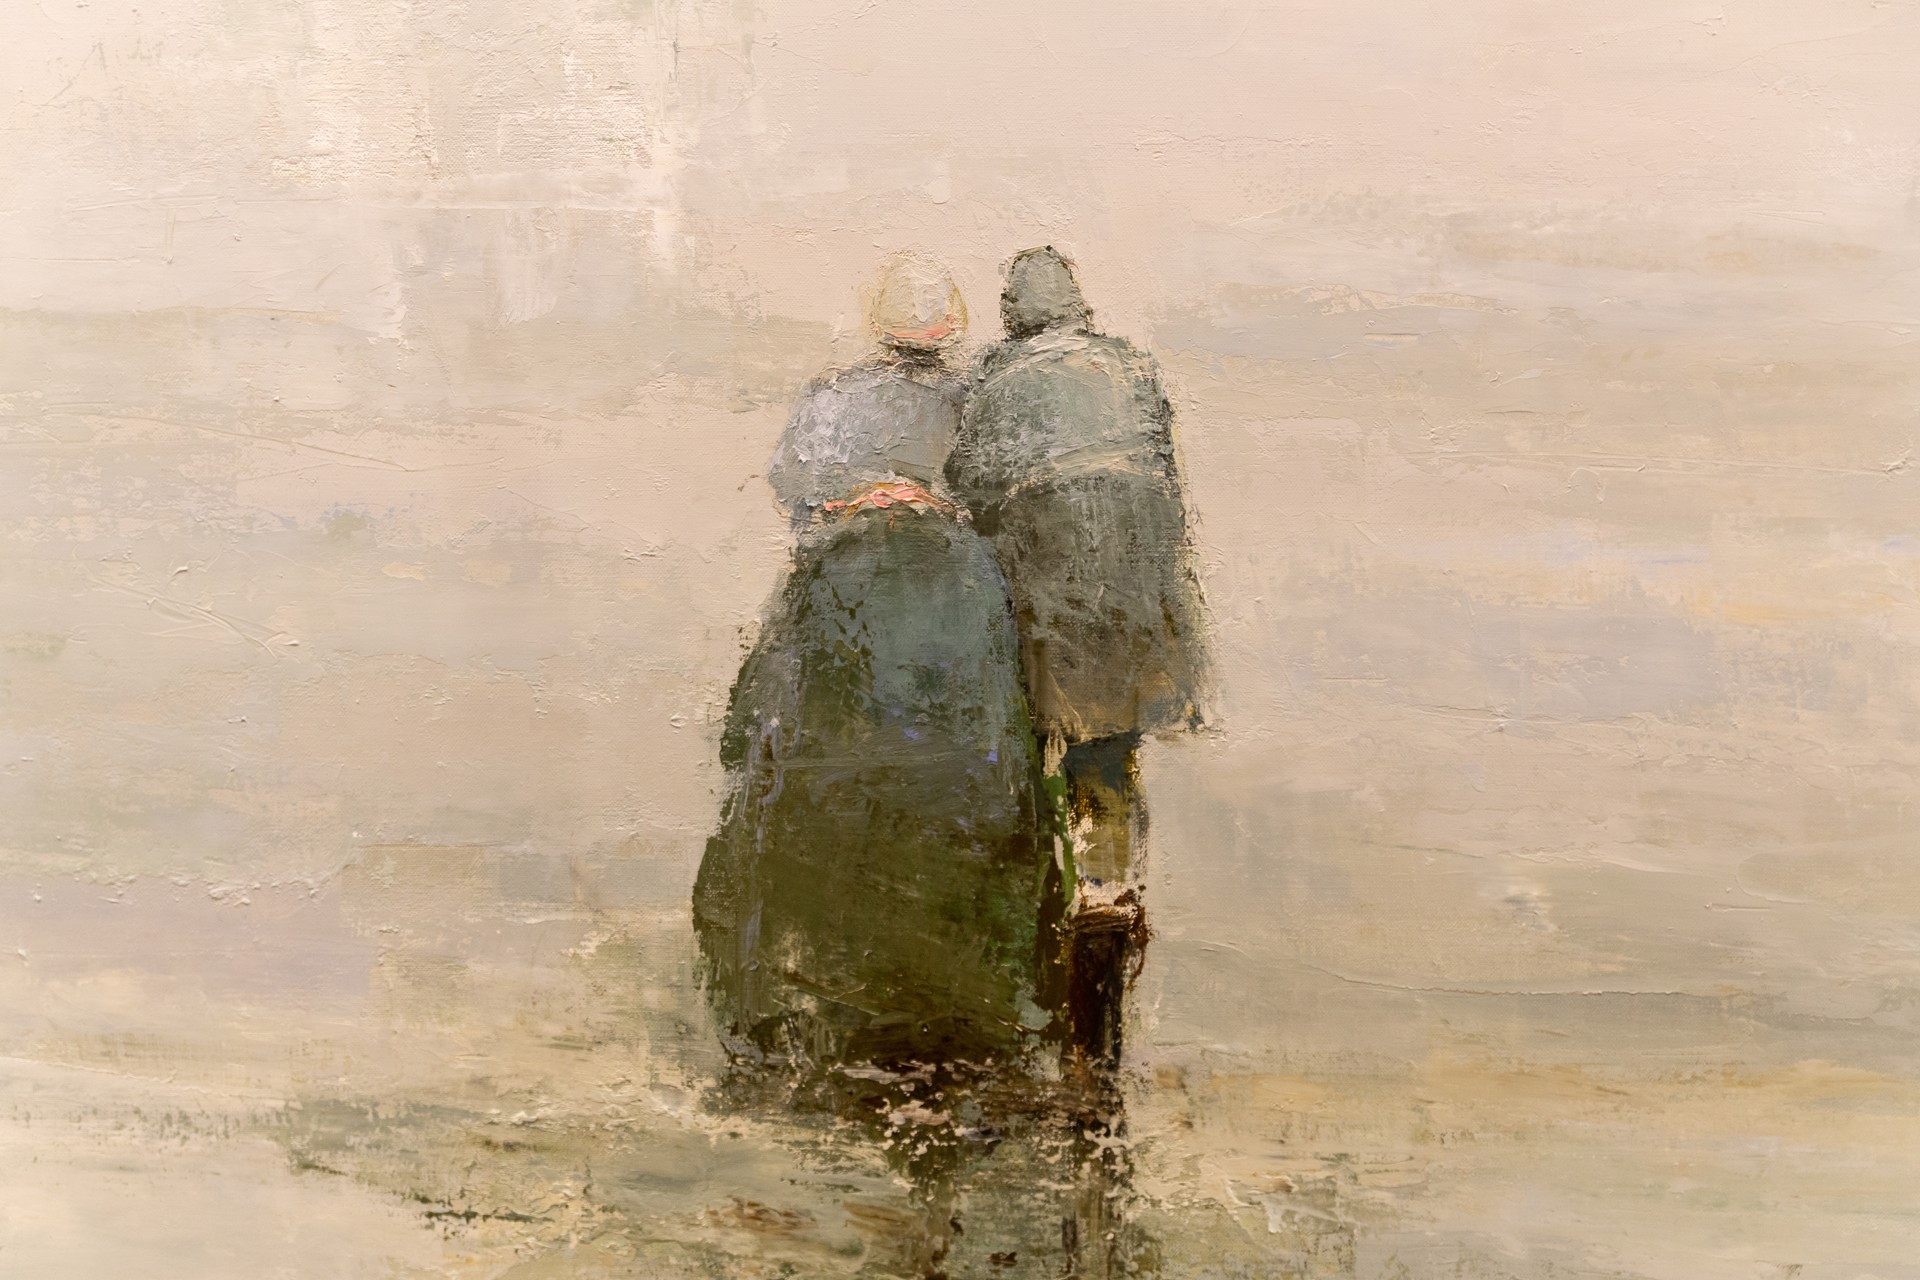 Many an Evening by the Waters Did We Watch the Stately Ships by France Jodoin